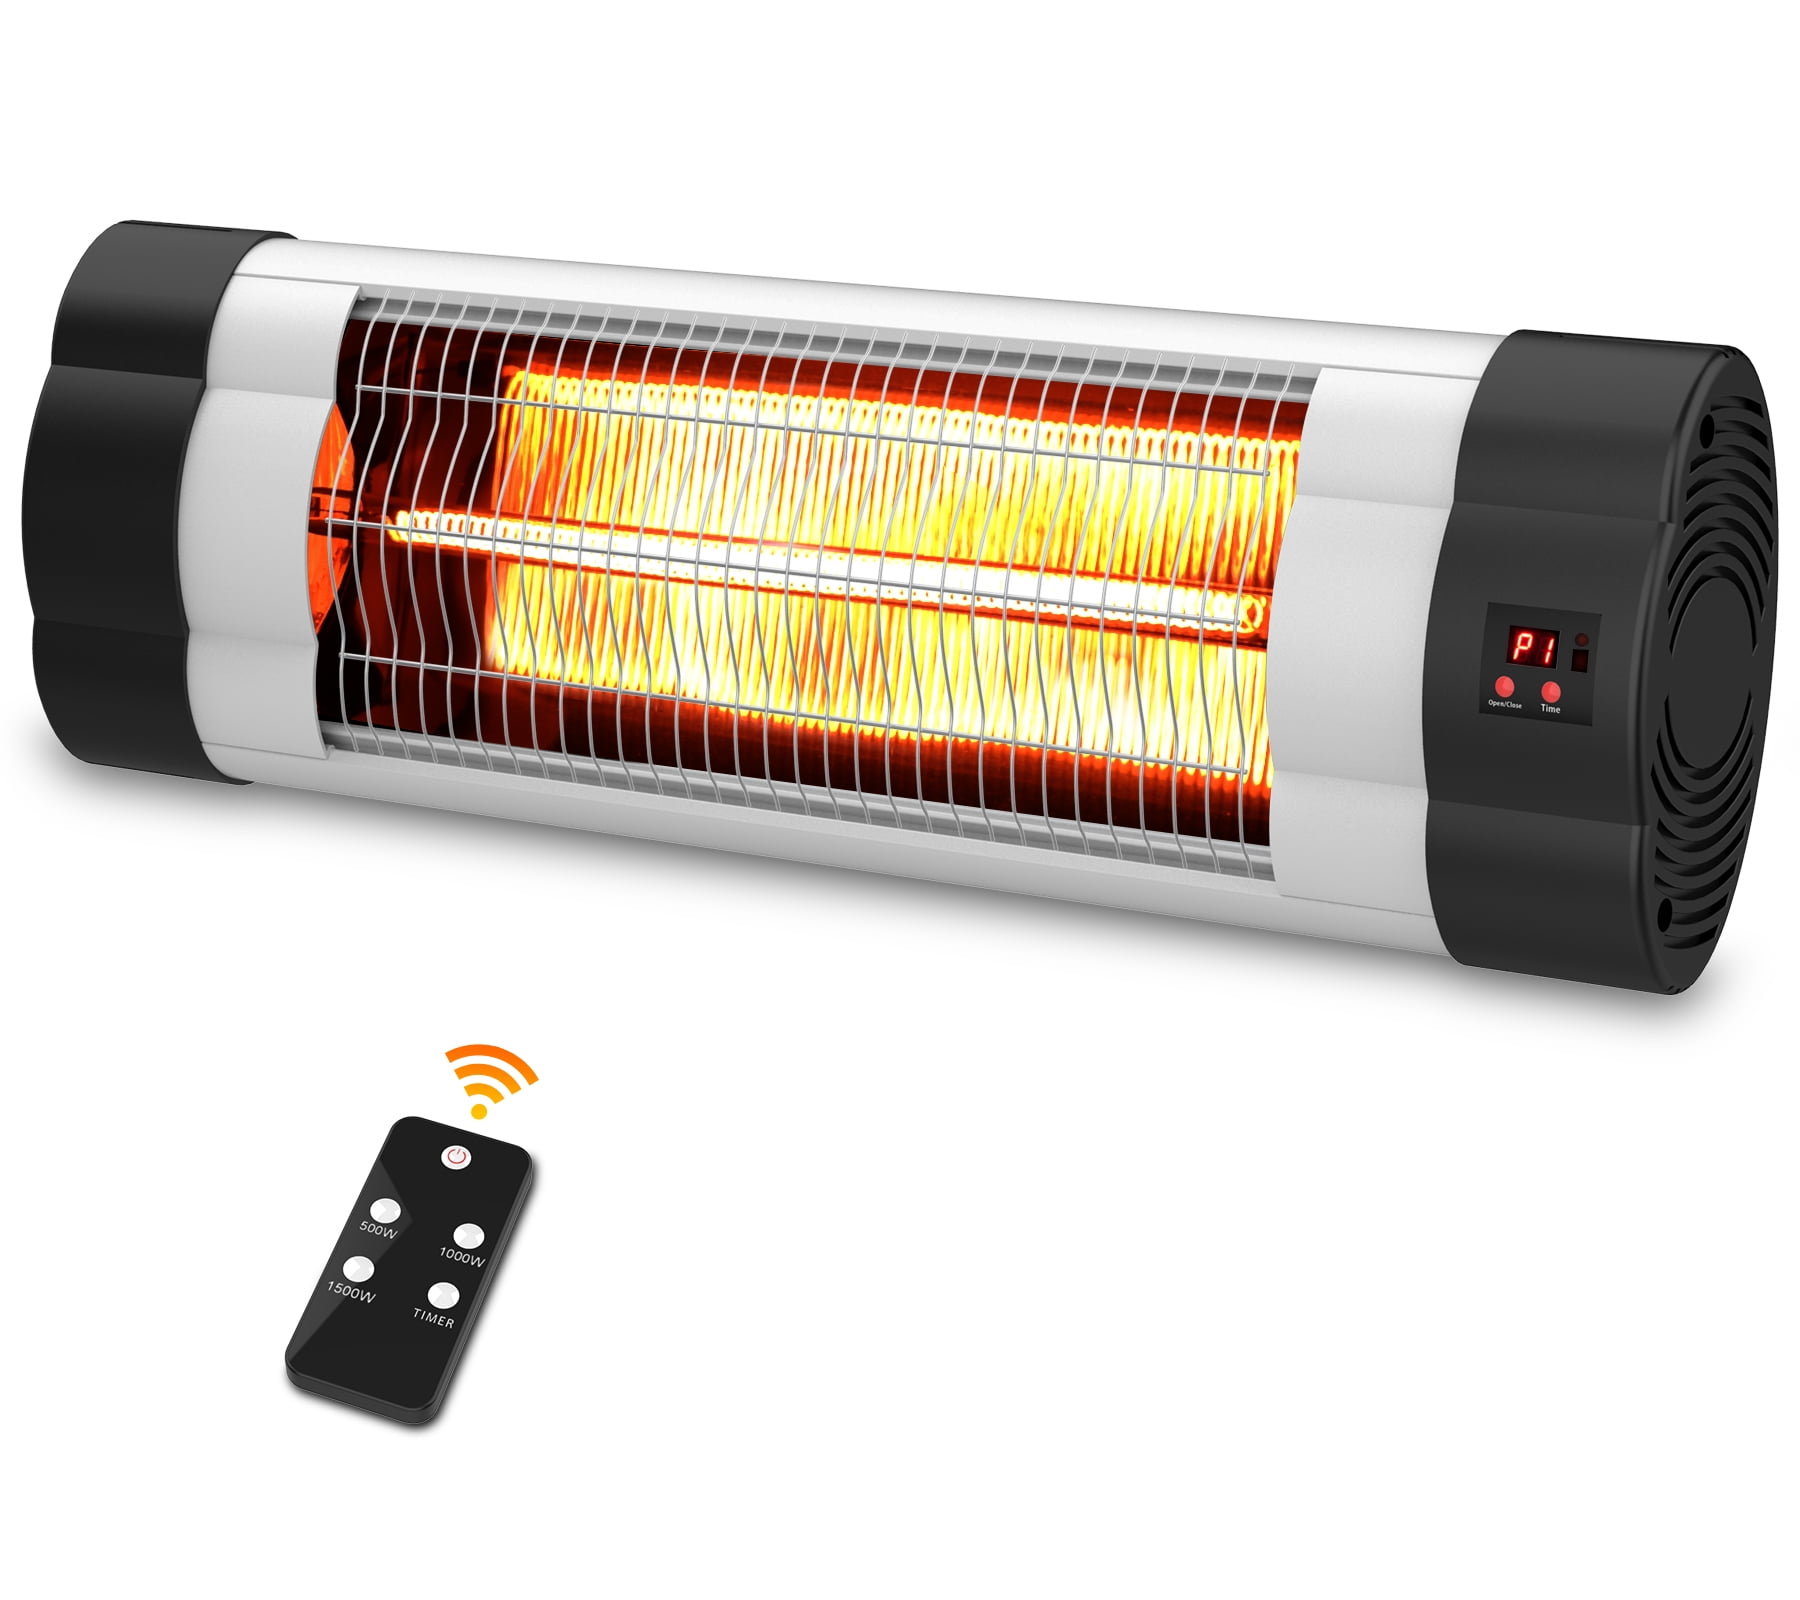 Details about   1500W Electric Infrared Patio Heater Wall Remote Control Timer Quiet Silver #42 